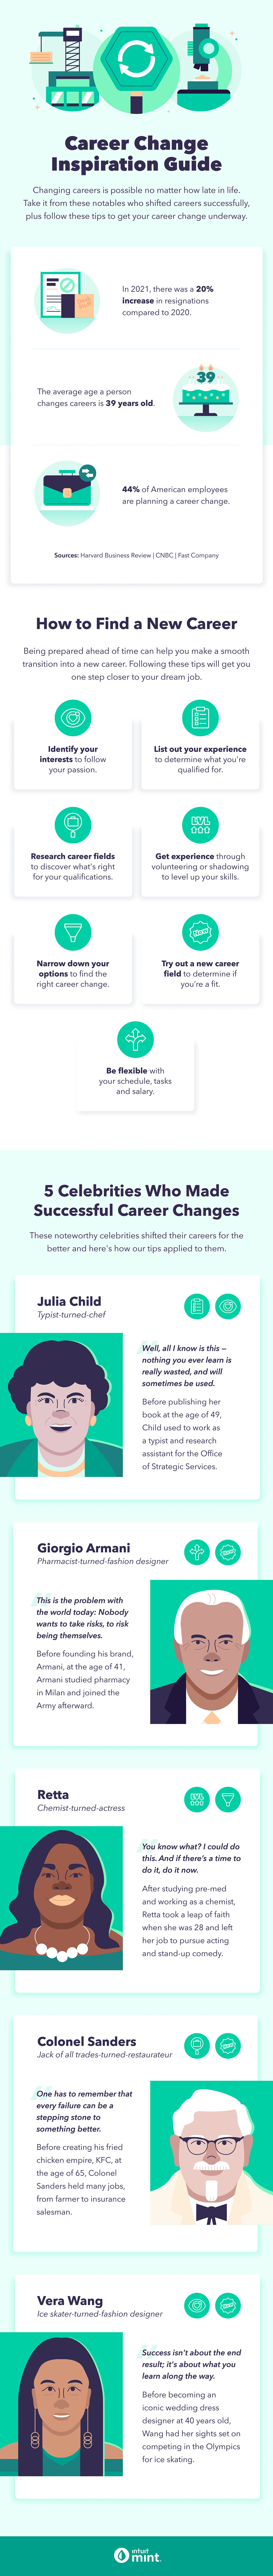 An infographic provides inspiration and tips on how to start a new career, including by providing examples of celebrities such as Vera Wang, Colonel Sanders, and Retta who made successful career shifts. 